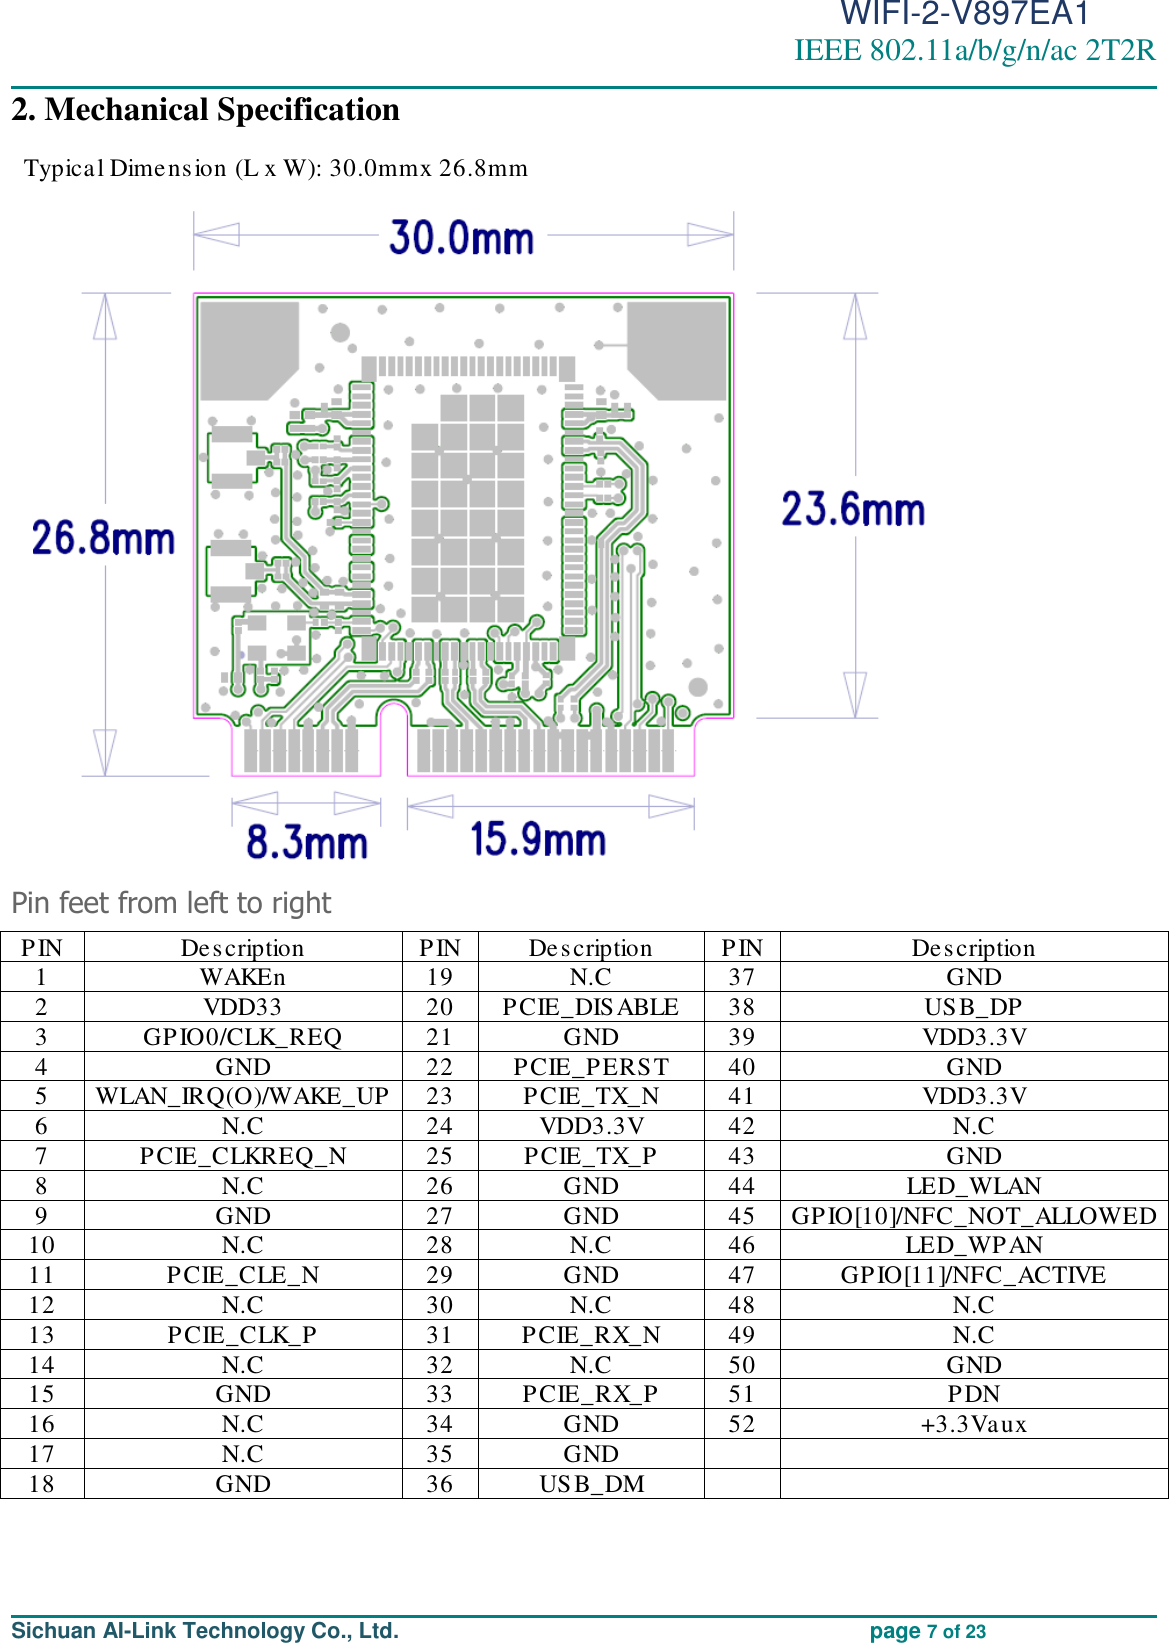                                                                                          WIFI-2-V897EA1 IEEE 802.11a/b/g/n/ac 2T2R                                                                                                                                                                                                                                                                                                                                                                                                                     Sichuan AI-Link Technology Co., Ltd.                                             page 7 of 23 2. Mechanical Specification Typical Dimension (L x W): 30.0mmx 26.8mm       Pin feet from left to right PIN Description PIN Description PIN Description 1 WAKEn 19 N.C 37 GND 2 VDD33 20 PCIE_DISABLE 38 USB_DP 3 GPIO0/CLK_REQ 21 GND 39 VDD3.3V 4 GND 22 PCIE_PERST 40 GND 5 WLAN_IRQ(O)/WAKE_UP 23 PCIE_TX_N 41 VDD3.3V 6 N.C 24 VDD3.3V 42 N.C 7 PCIE_CLKREQ_N 25 PCIE_TX_P 43 GND 8 N.C 26 GND 44 LED_WLAN 9 GND 27 GND 45 GPIO[10]/NFC_NOT_ALLOWED 10 N.C 28 N.C 46 LED_WPAN 11 PCIE_CLE_N 29 GND 47 GPIO[11]/NFC_ACTIVE 12 N.C 30 N.C 48 N.C 13 PCIE_CLK_P 31 PCIE_RX_N 49 N.C 14 N.C 32 N.C 50 GND 15 GND 33 PCIE_RX_P 51 PDN 16 N.C 34 GND 52 +3.3Vaux 17 N.C 35 GND   18 GND 36 USB_DM     